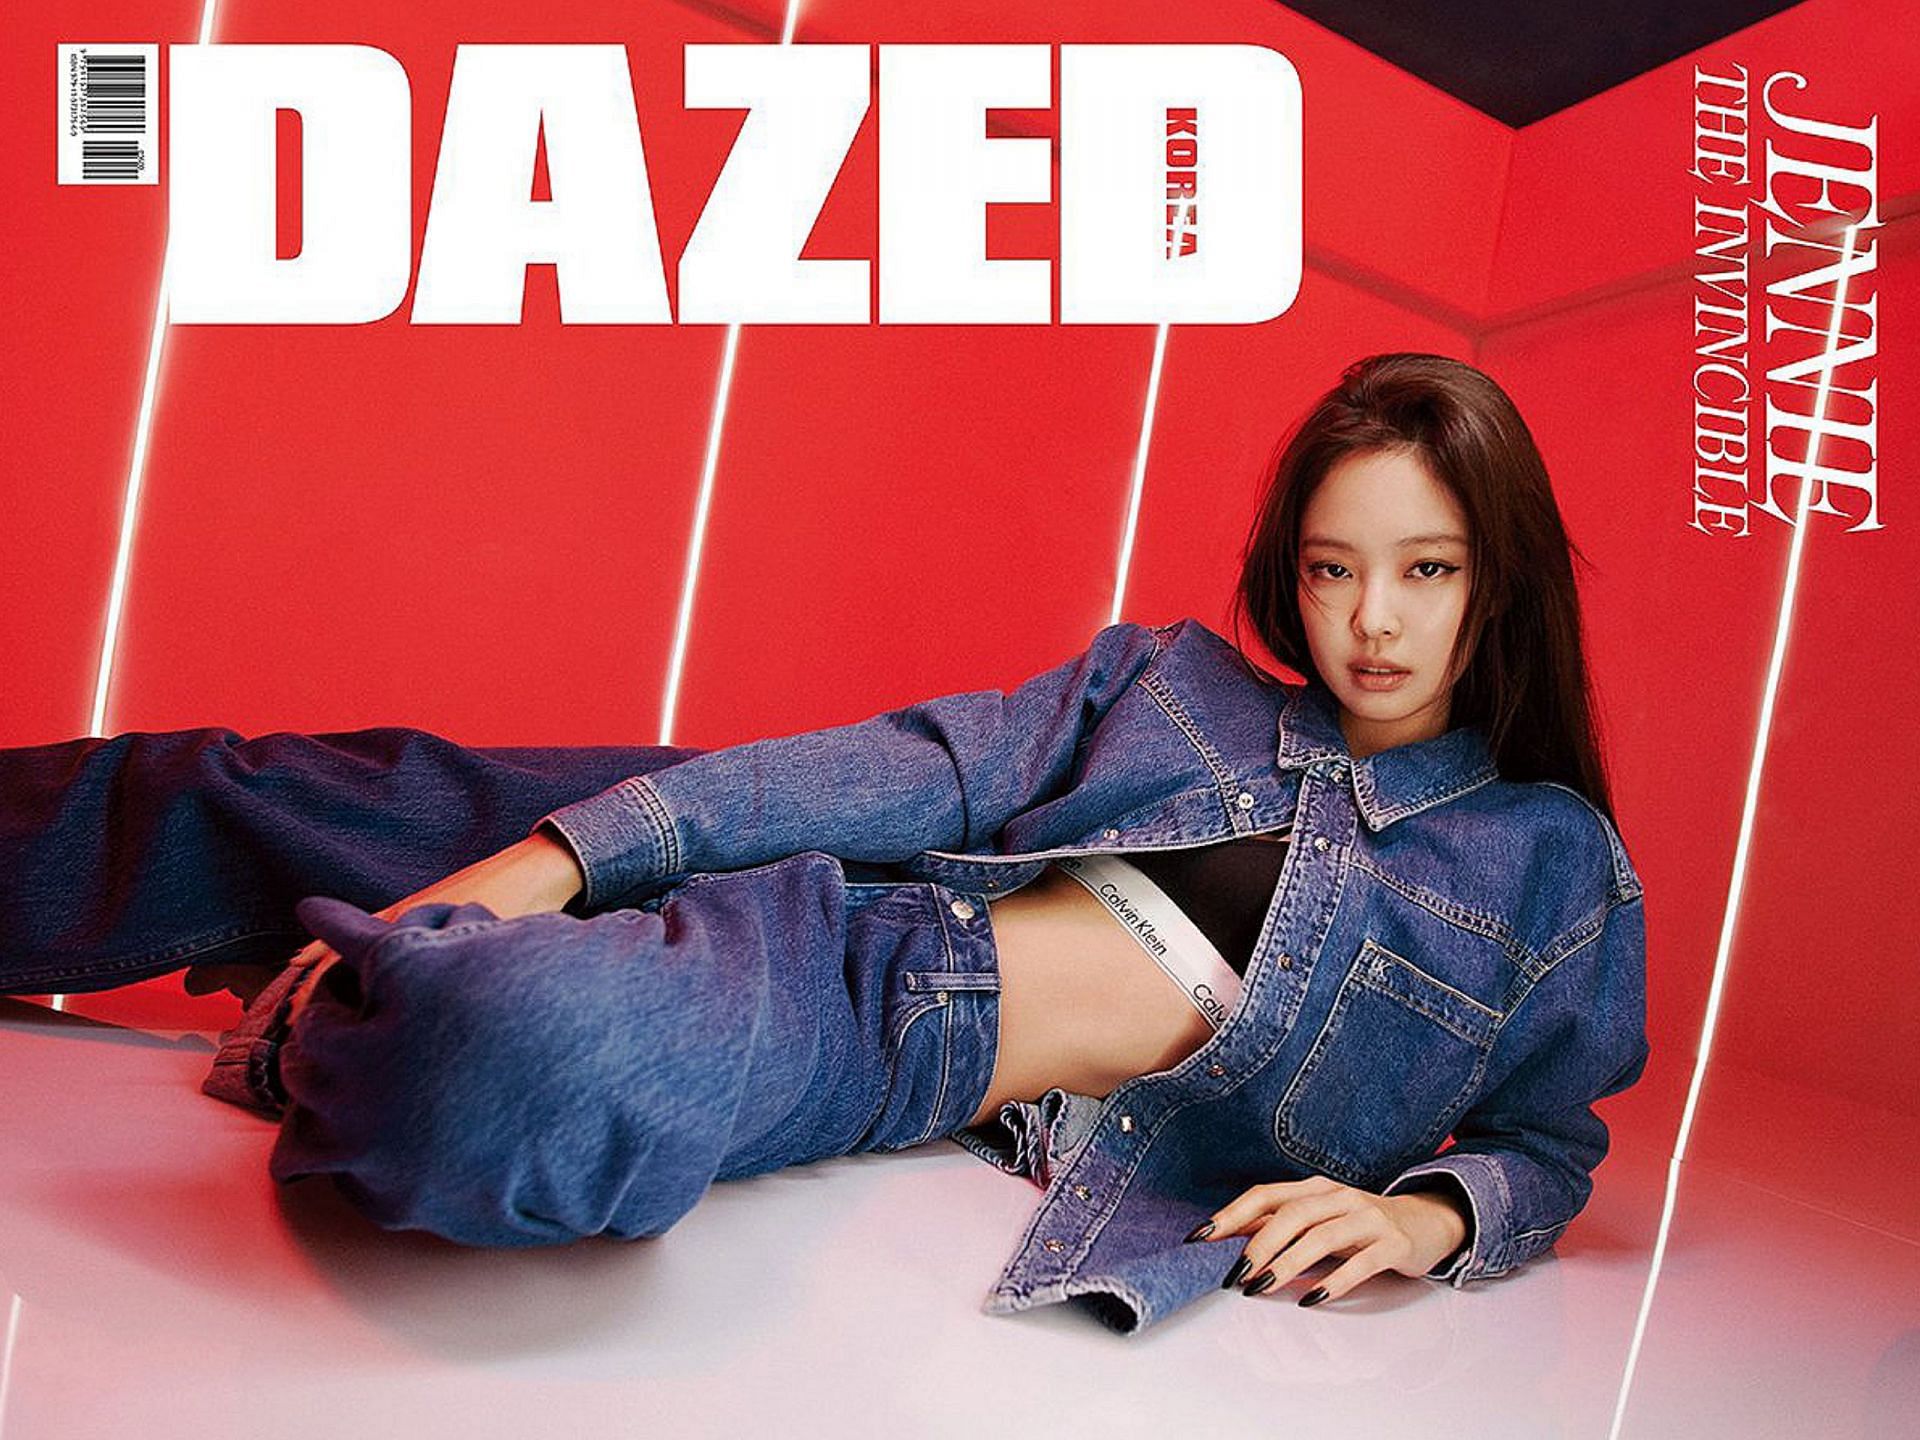 The star has collaborated with Calvin Klein several times in the past, and is their brand ambassador. (Image via Dazed Korea)